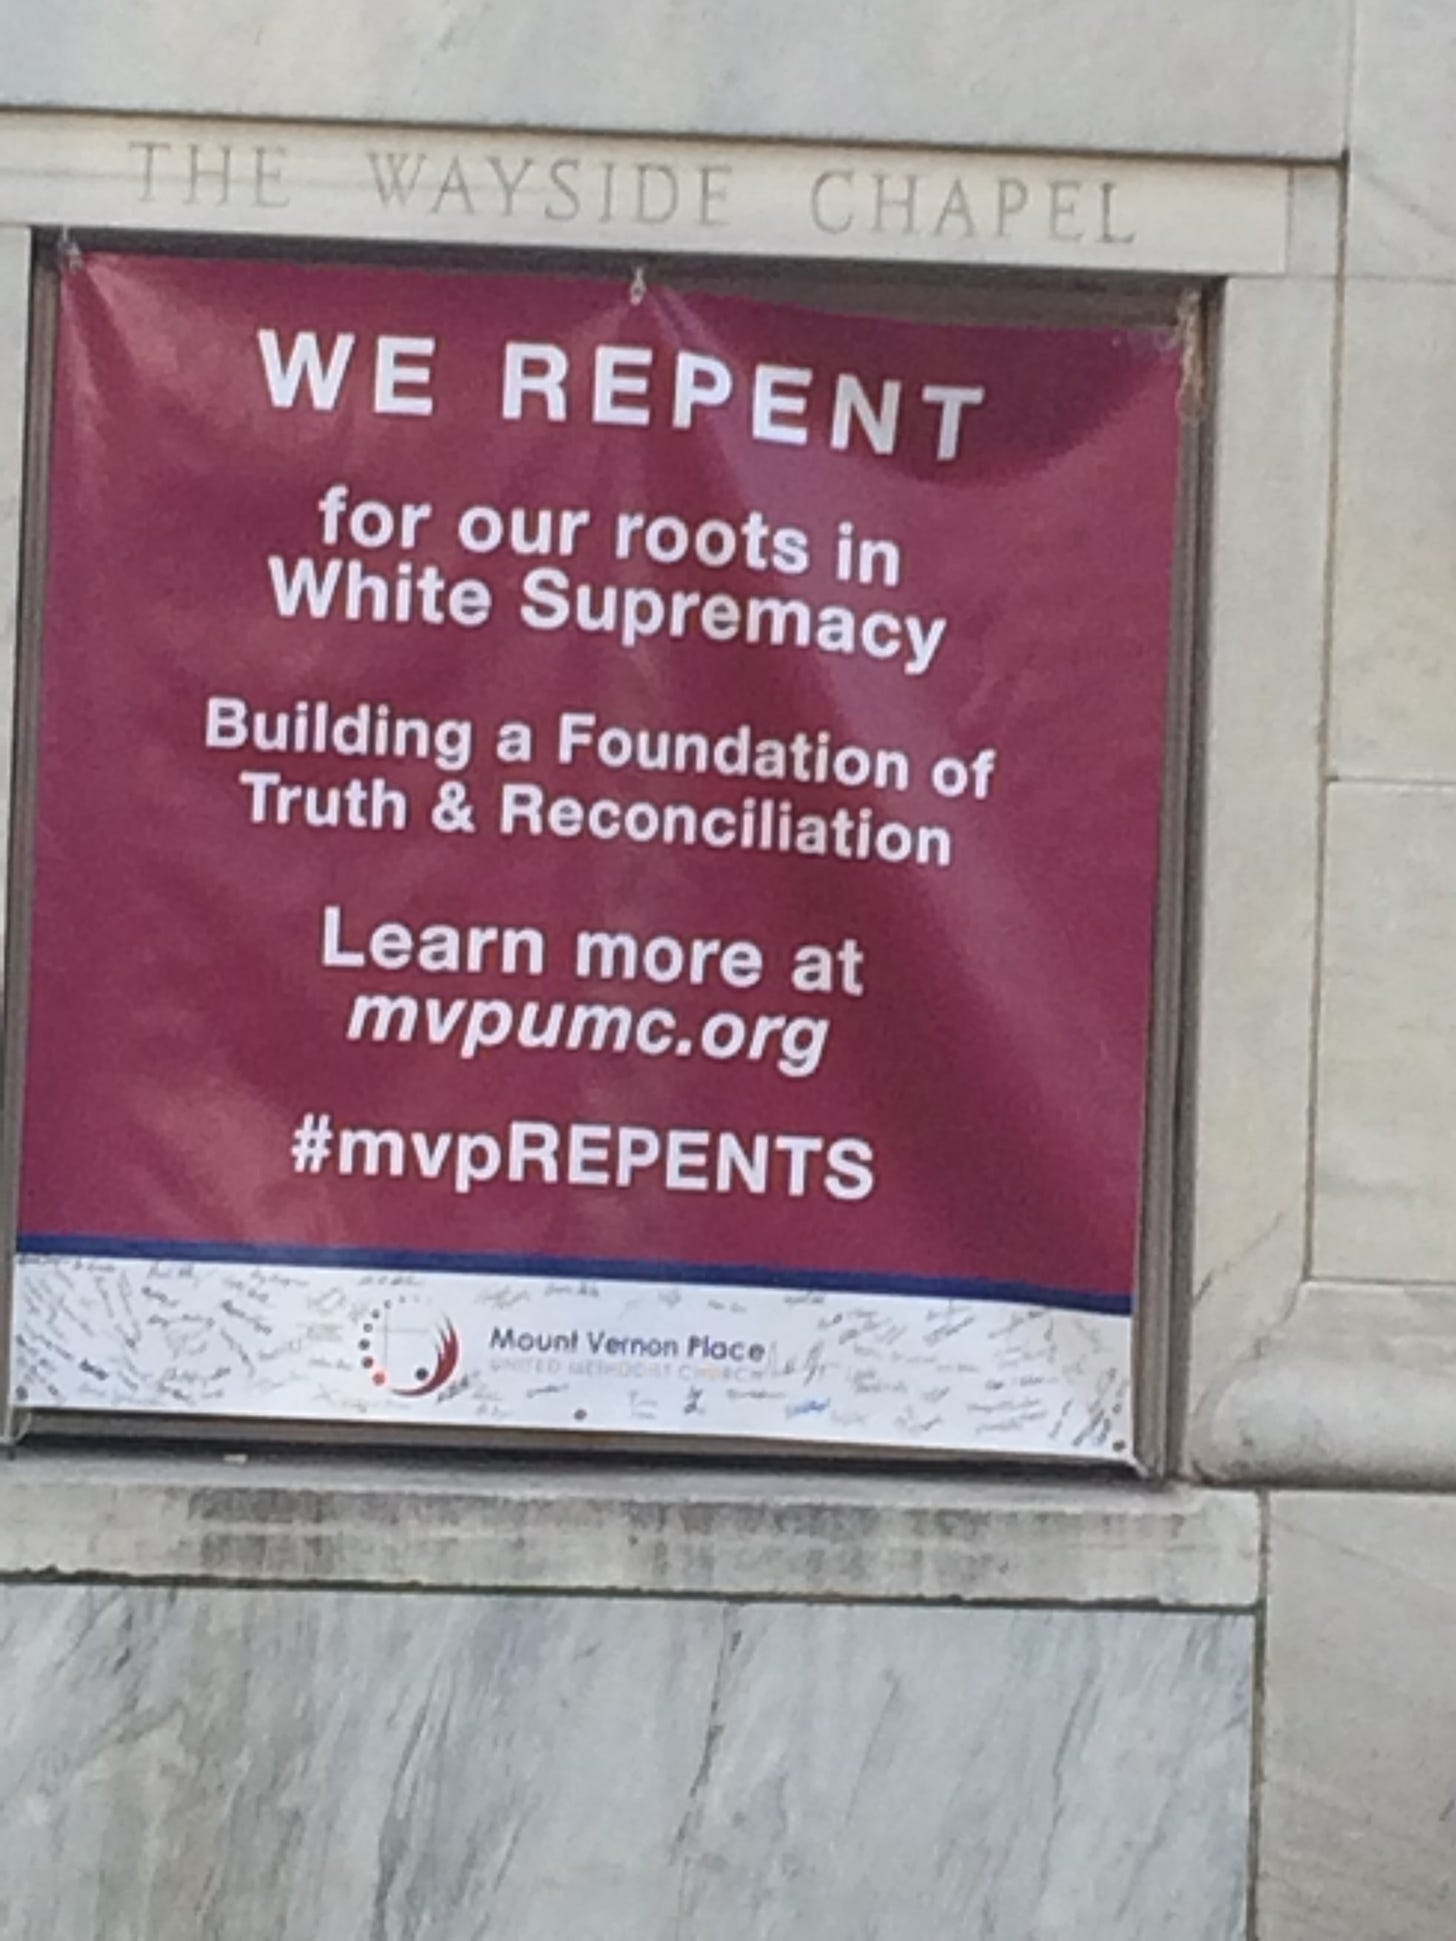 A sign mounted on the side of the Mount Vernon Place United Methodist Church says "WE REPENT for our roots in White Supremacy Building a Foundation of Truth & Reconciliation Learn more at mvpumc.org #mvpREPENTS